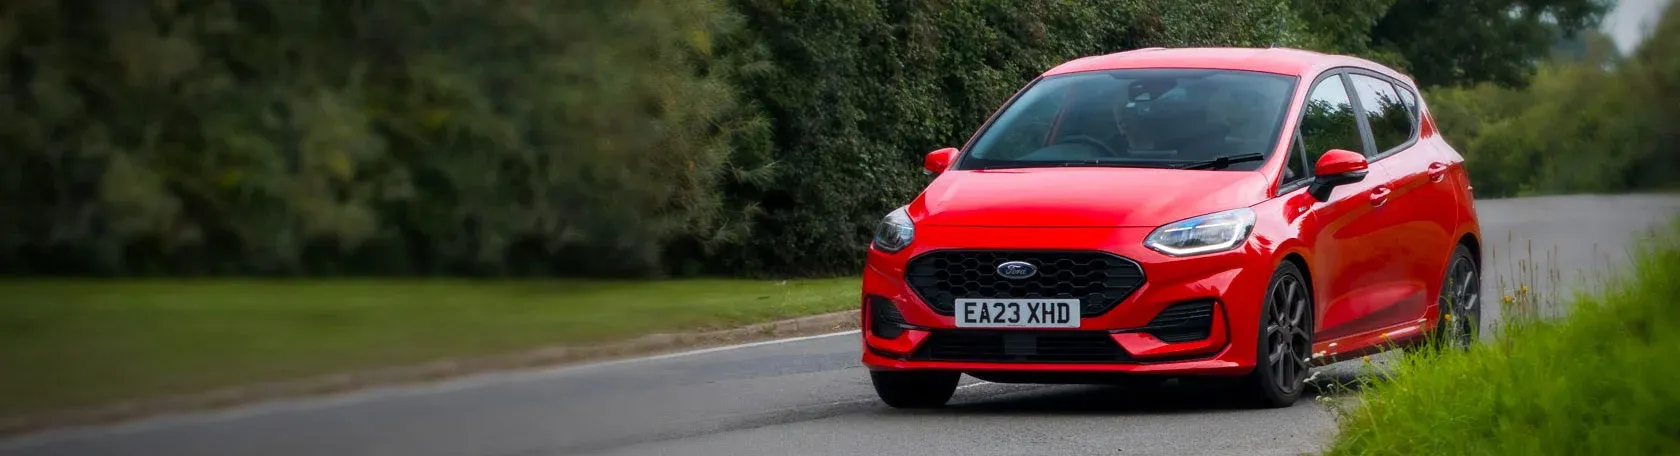 Used Ford Fiesta, Driving, Red